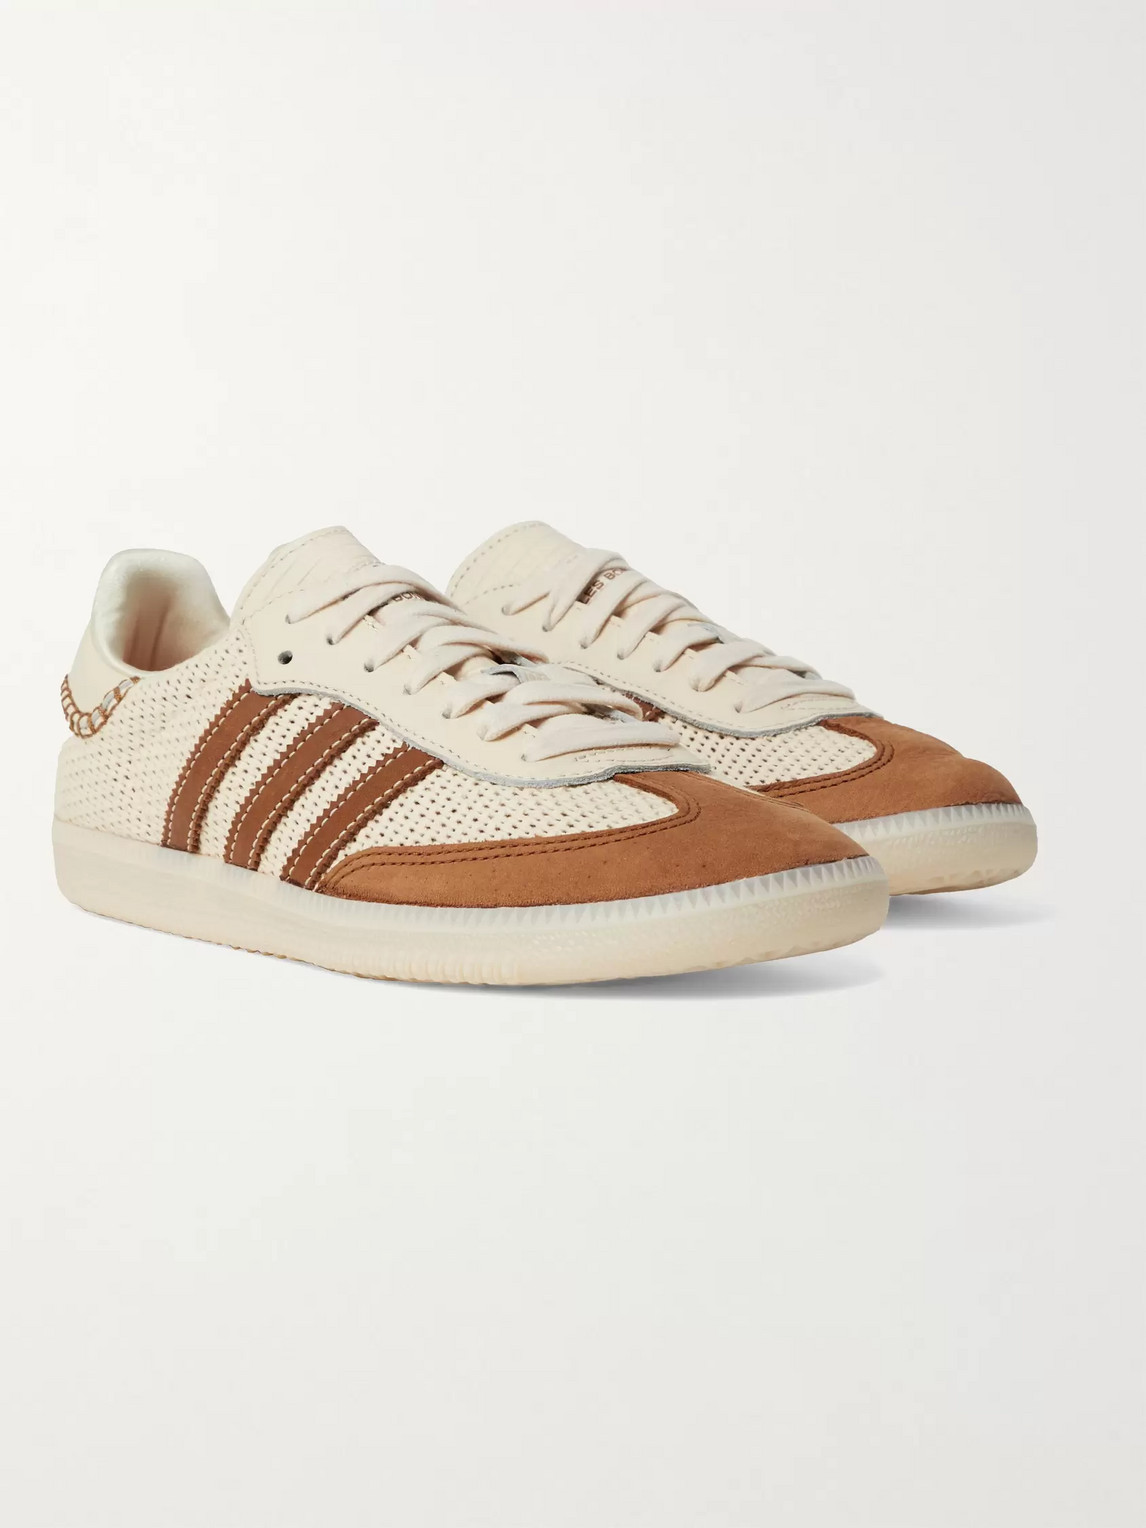 Adidas Consortium Wales Bonner Samba Leather And Suede Sneakers In White